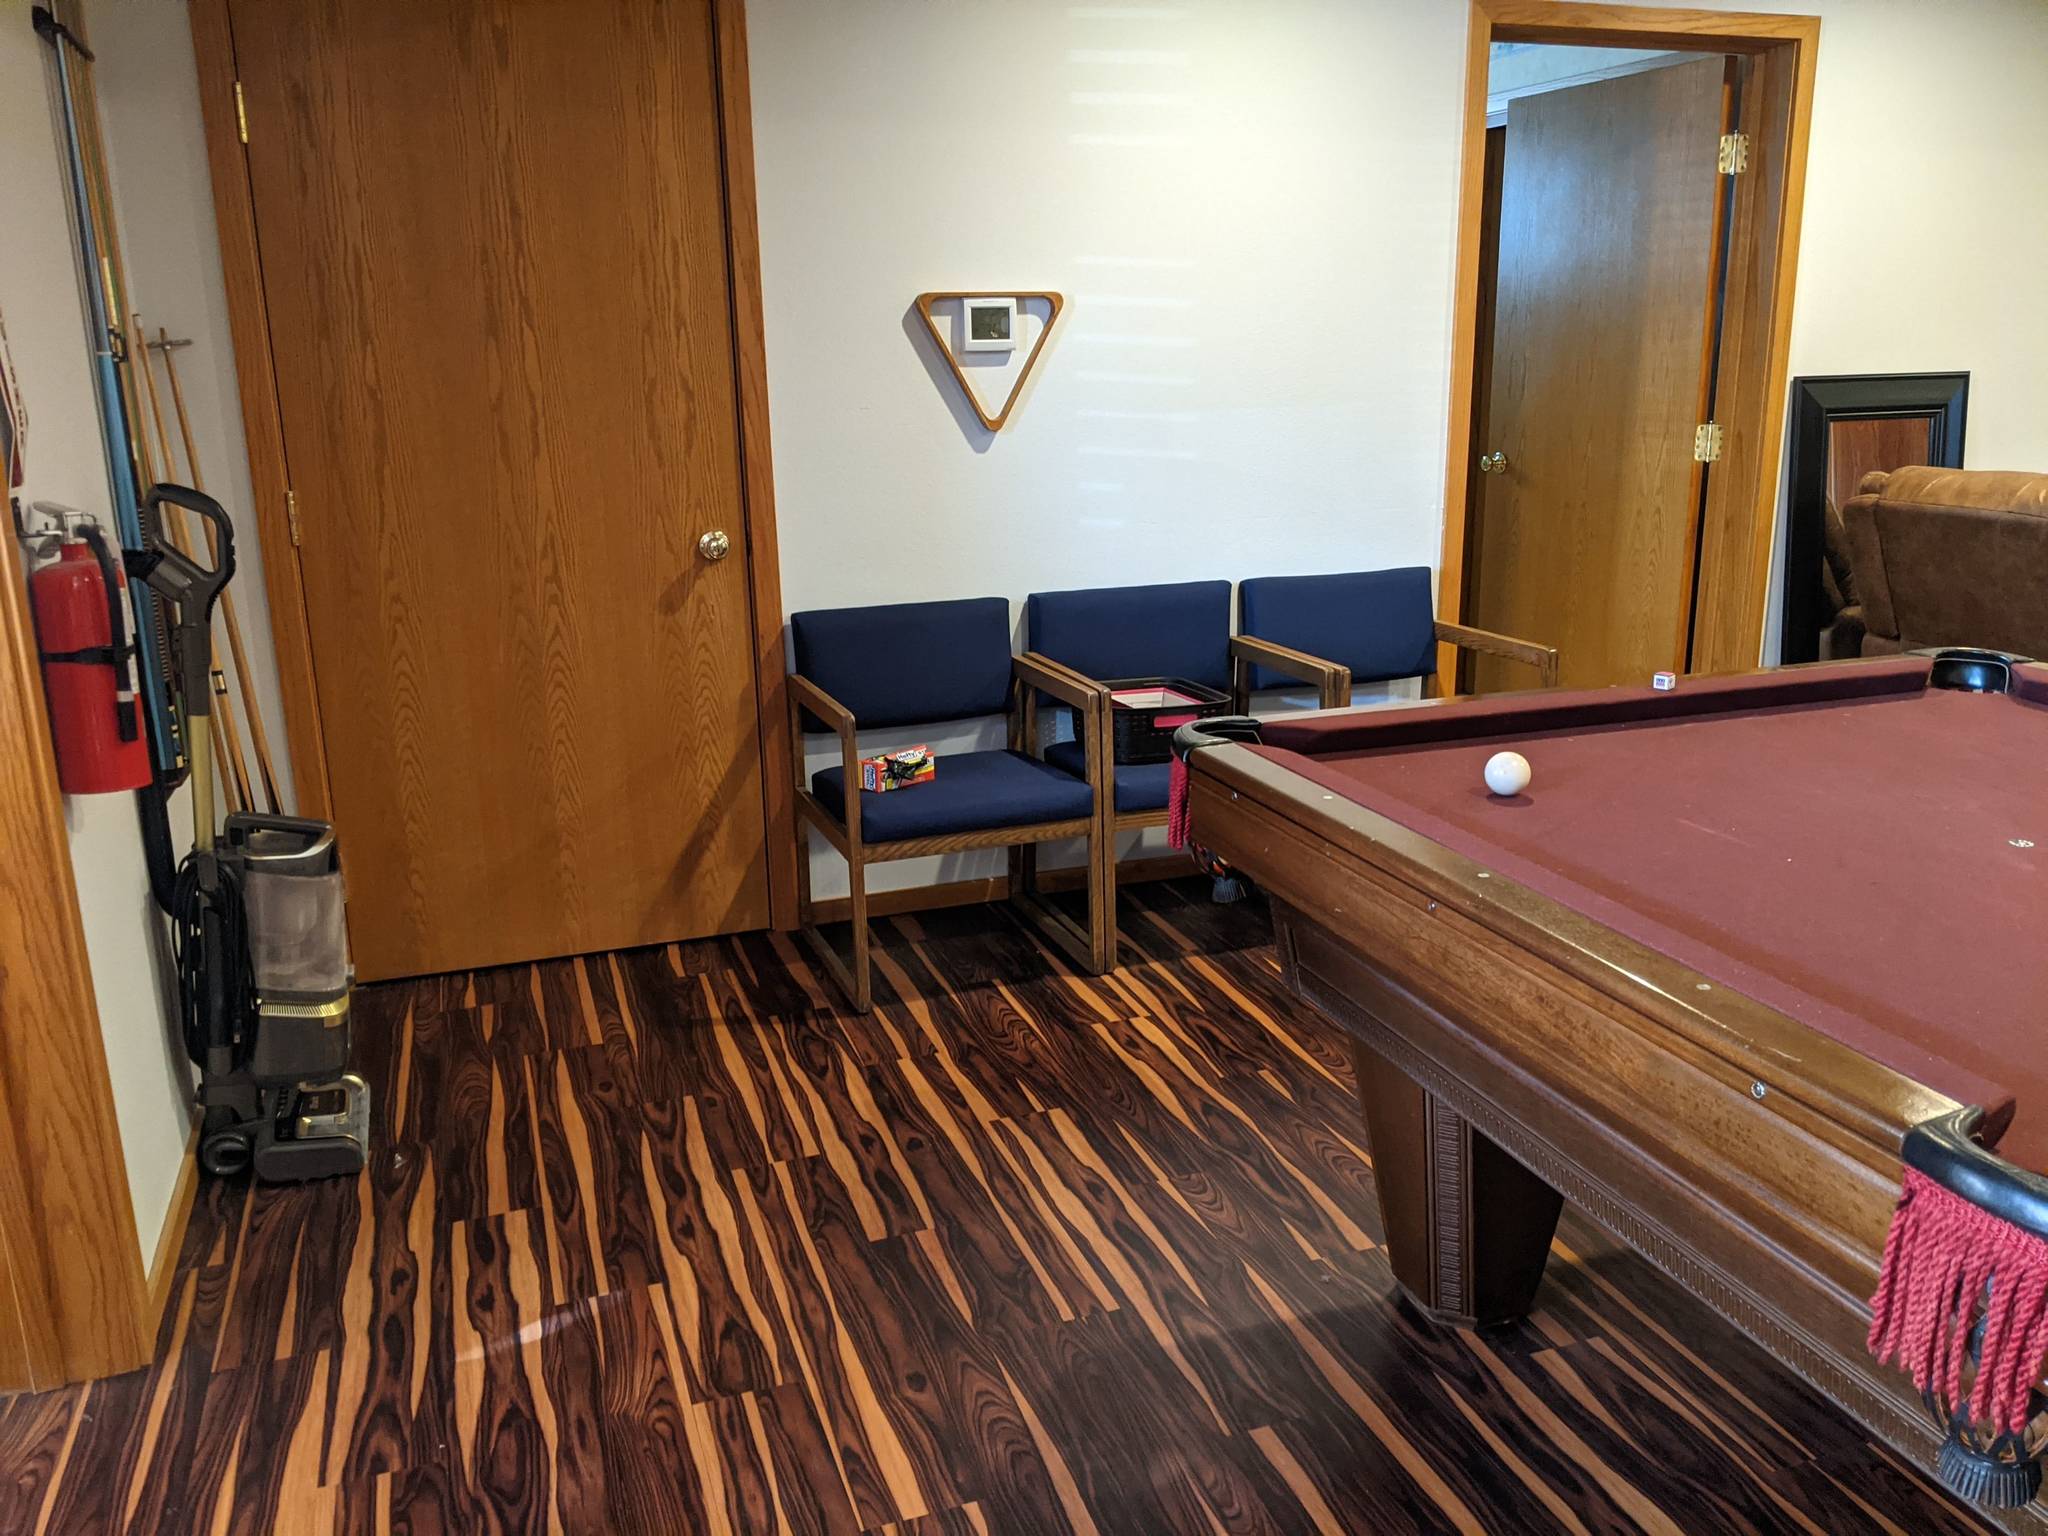 DAVE HAVILAND | THE DAILY WORLD 
A pool table and chairs in the common area of the shelter.